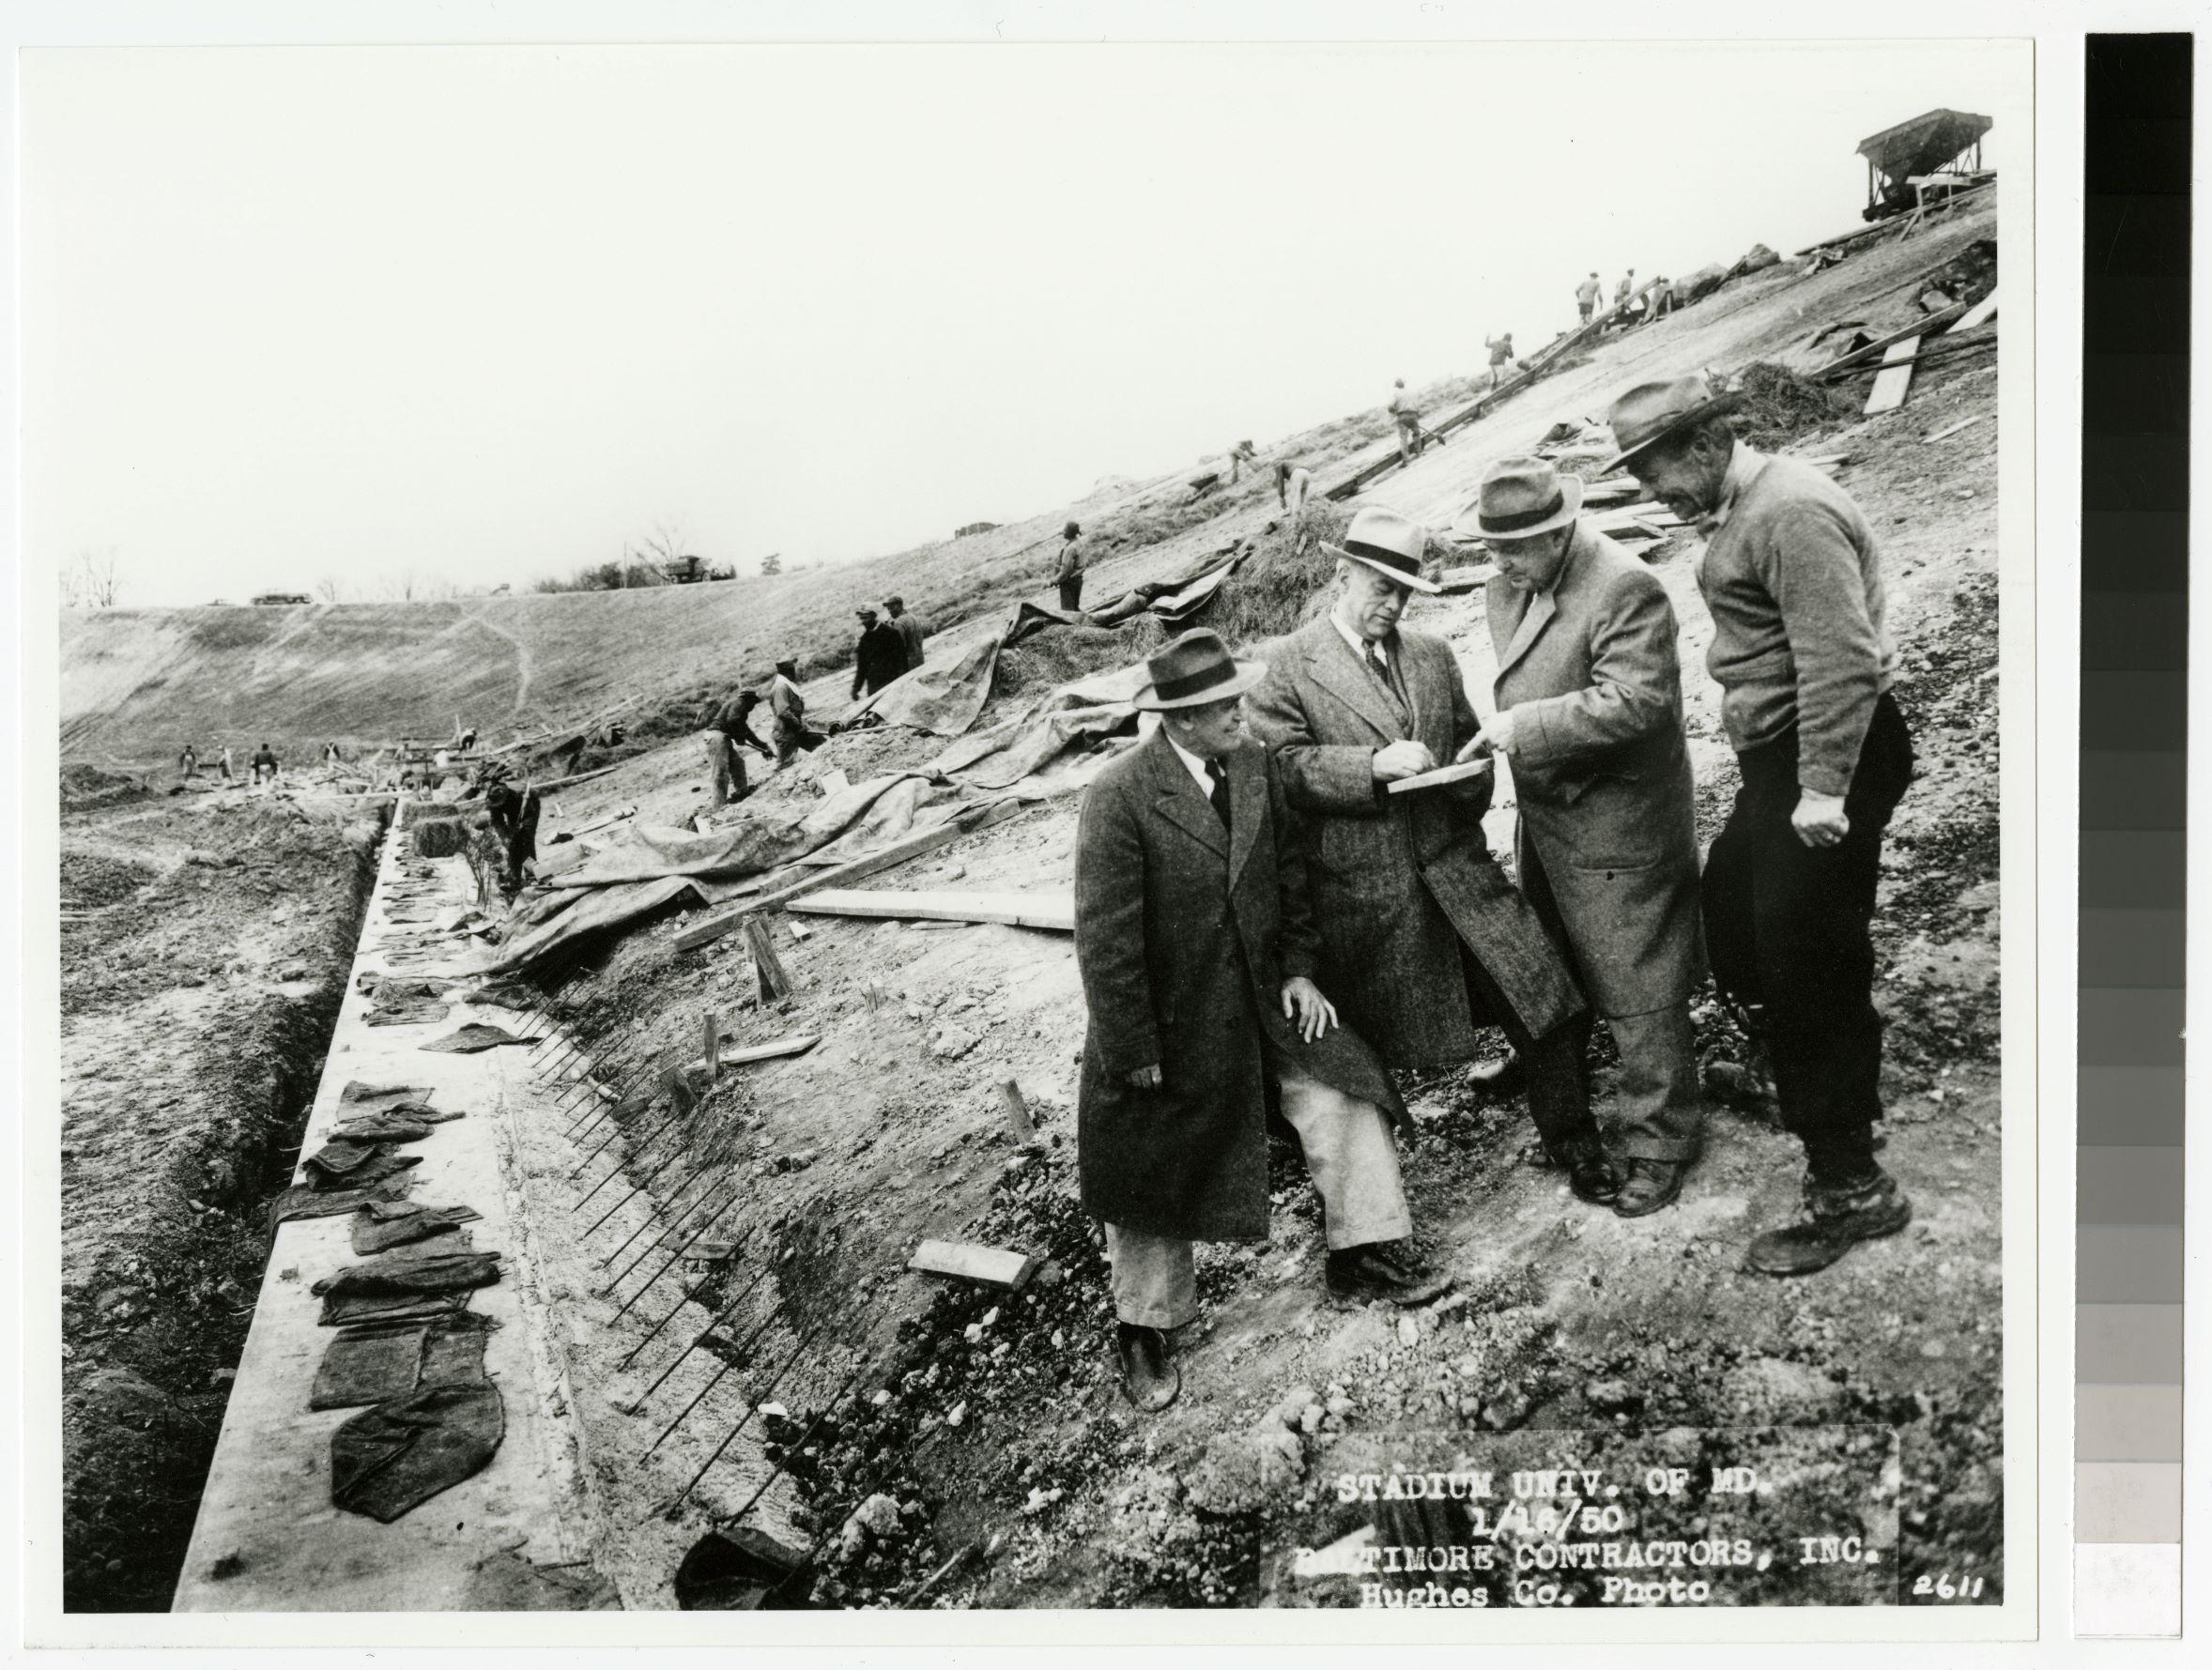 H.C. Byrd talking to white men while Black men in the background are at work on Byrd Stadium construction, January 16th, 1950 